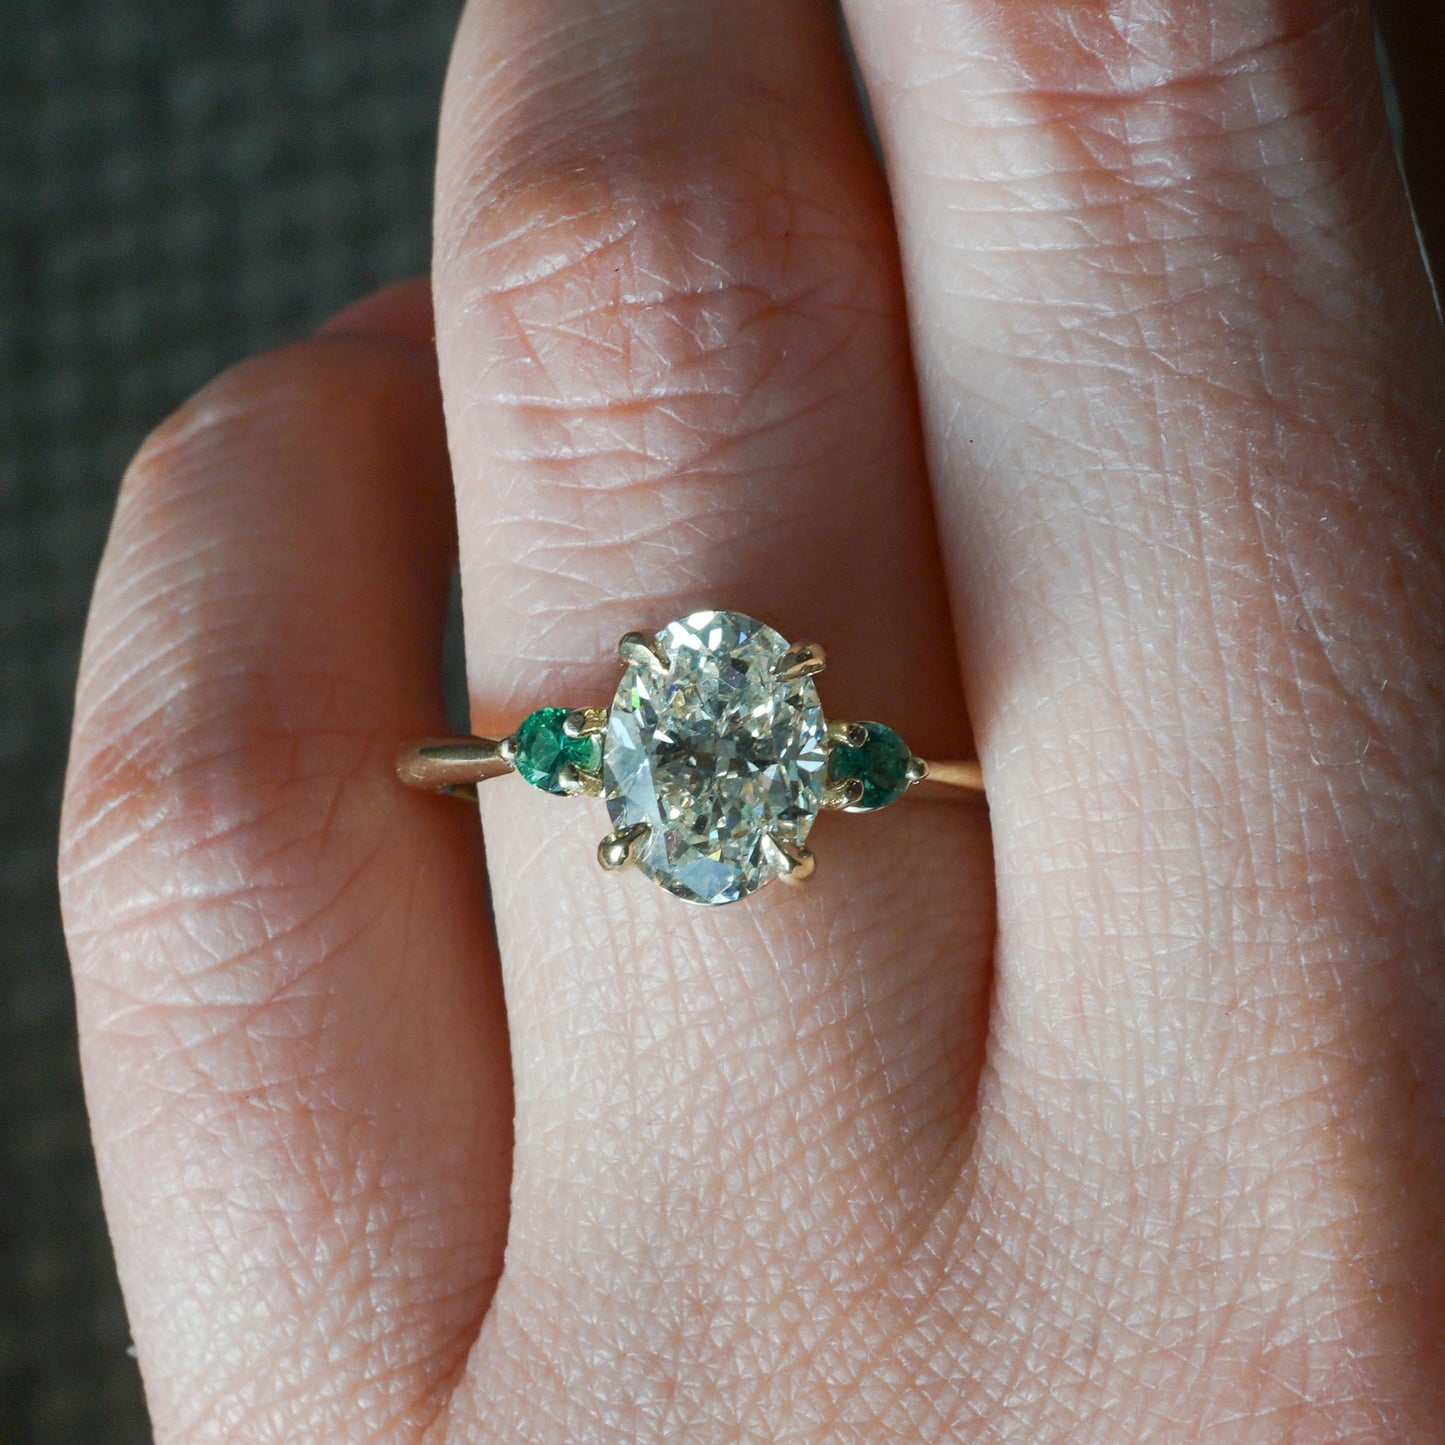 1.51 Oval Cut Diamond Engagement Ring w/ Emerald Accents